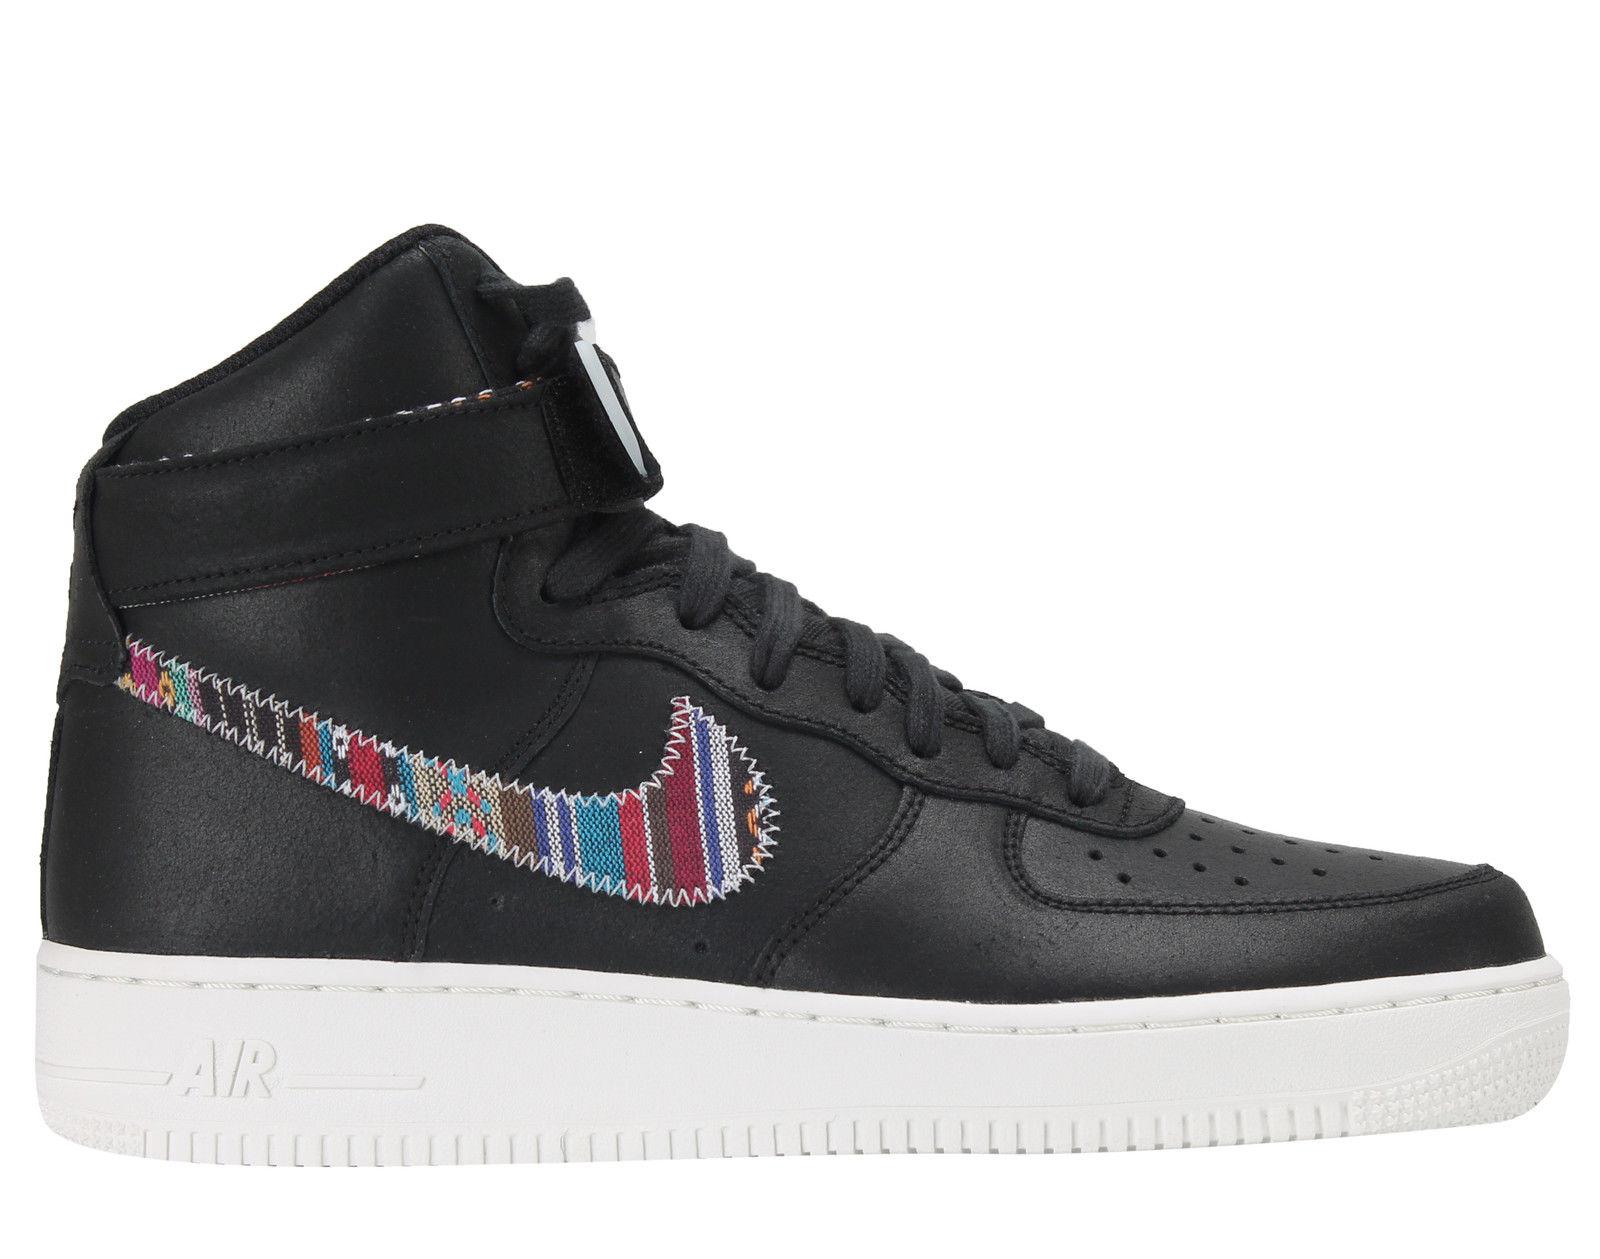 NIKE AIR FORCE 1 HIGH ’07 LV8 ”Afro Punk”in BLACK（806403-006）